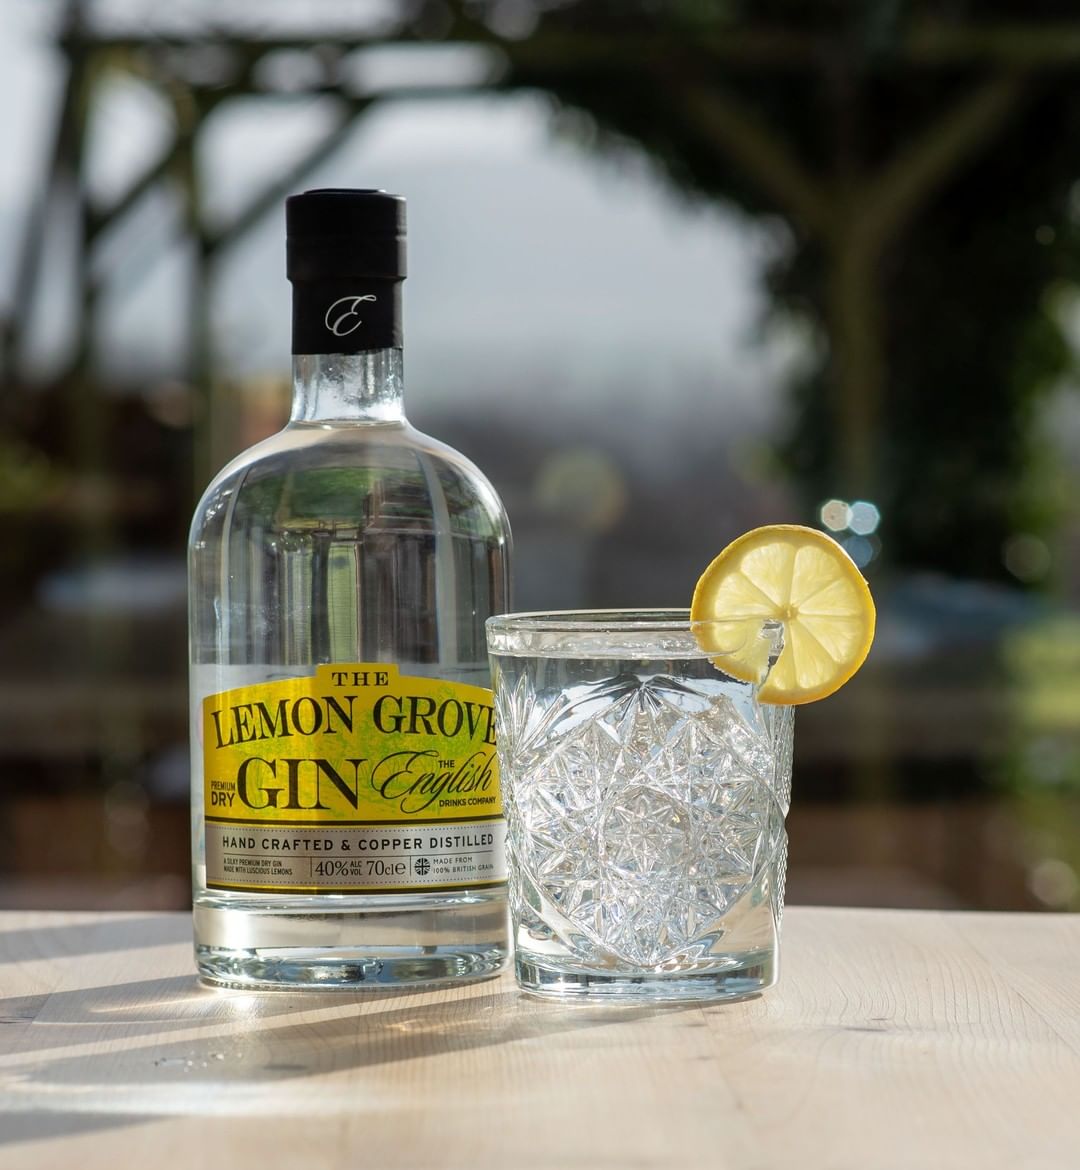 Image of Lemon Grove Gin made in the UK by The English Drinks Company. Buying this product supports a UK business, jobs and the local community